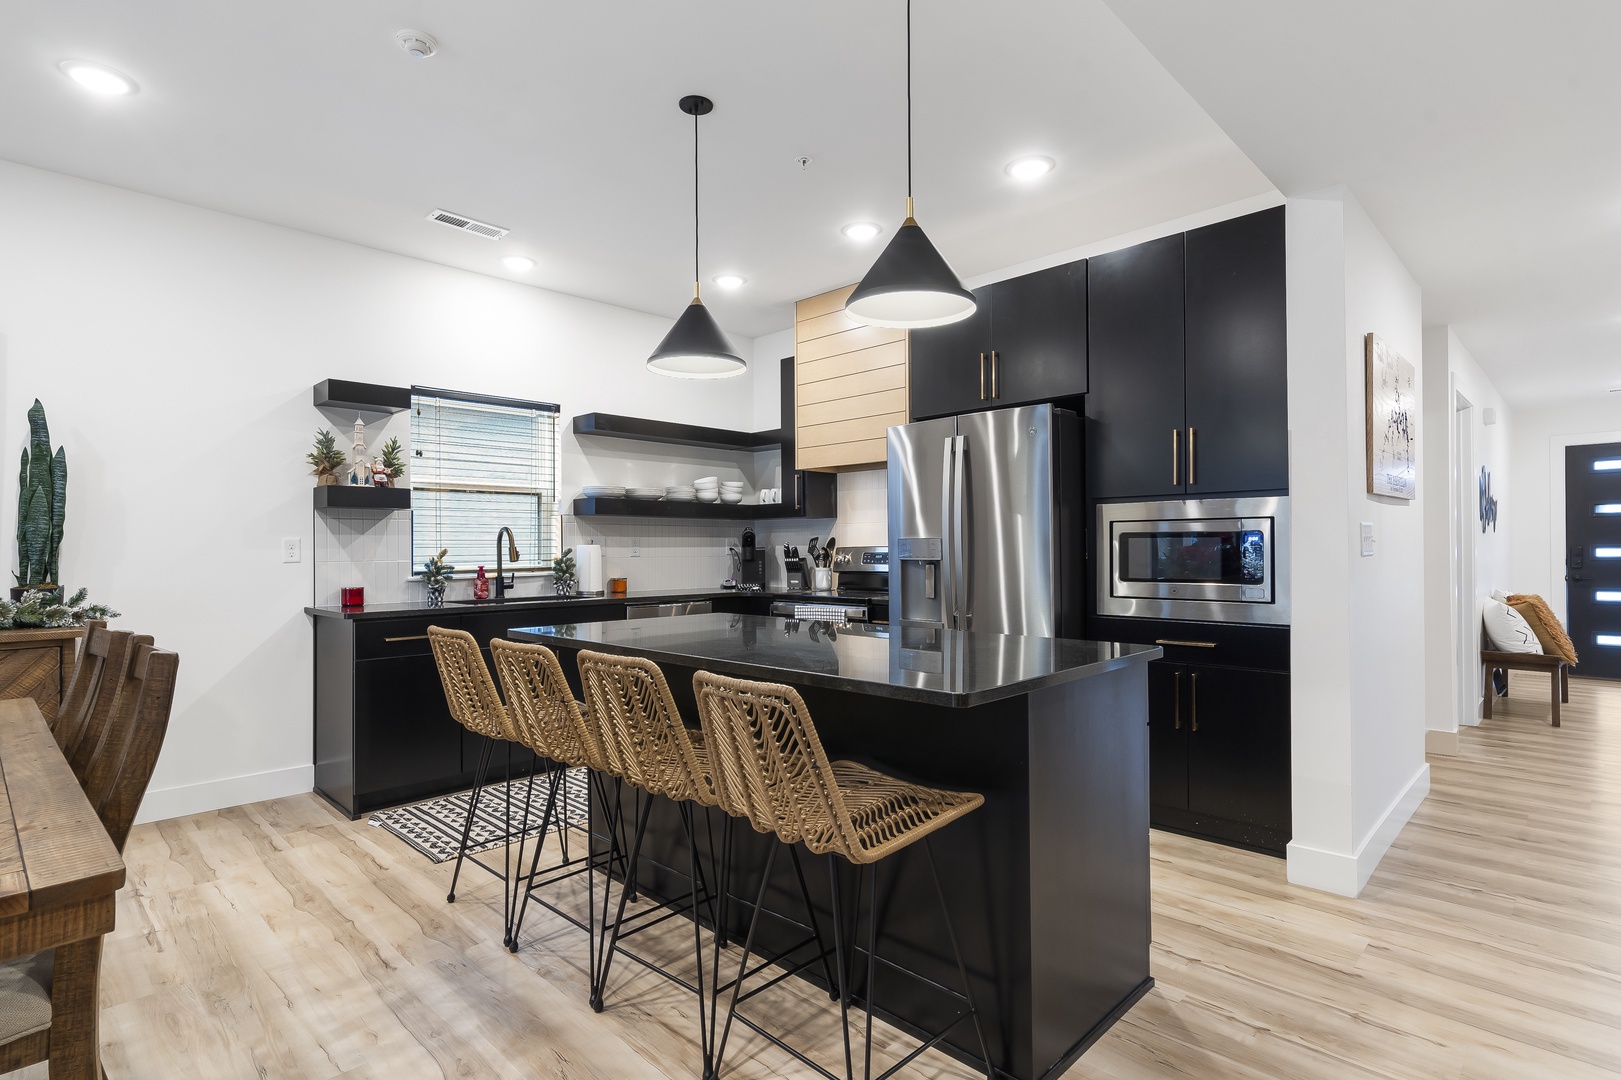 Sip morning coffee or grab a bite at the kitchen counter, with seating for 4